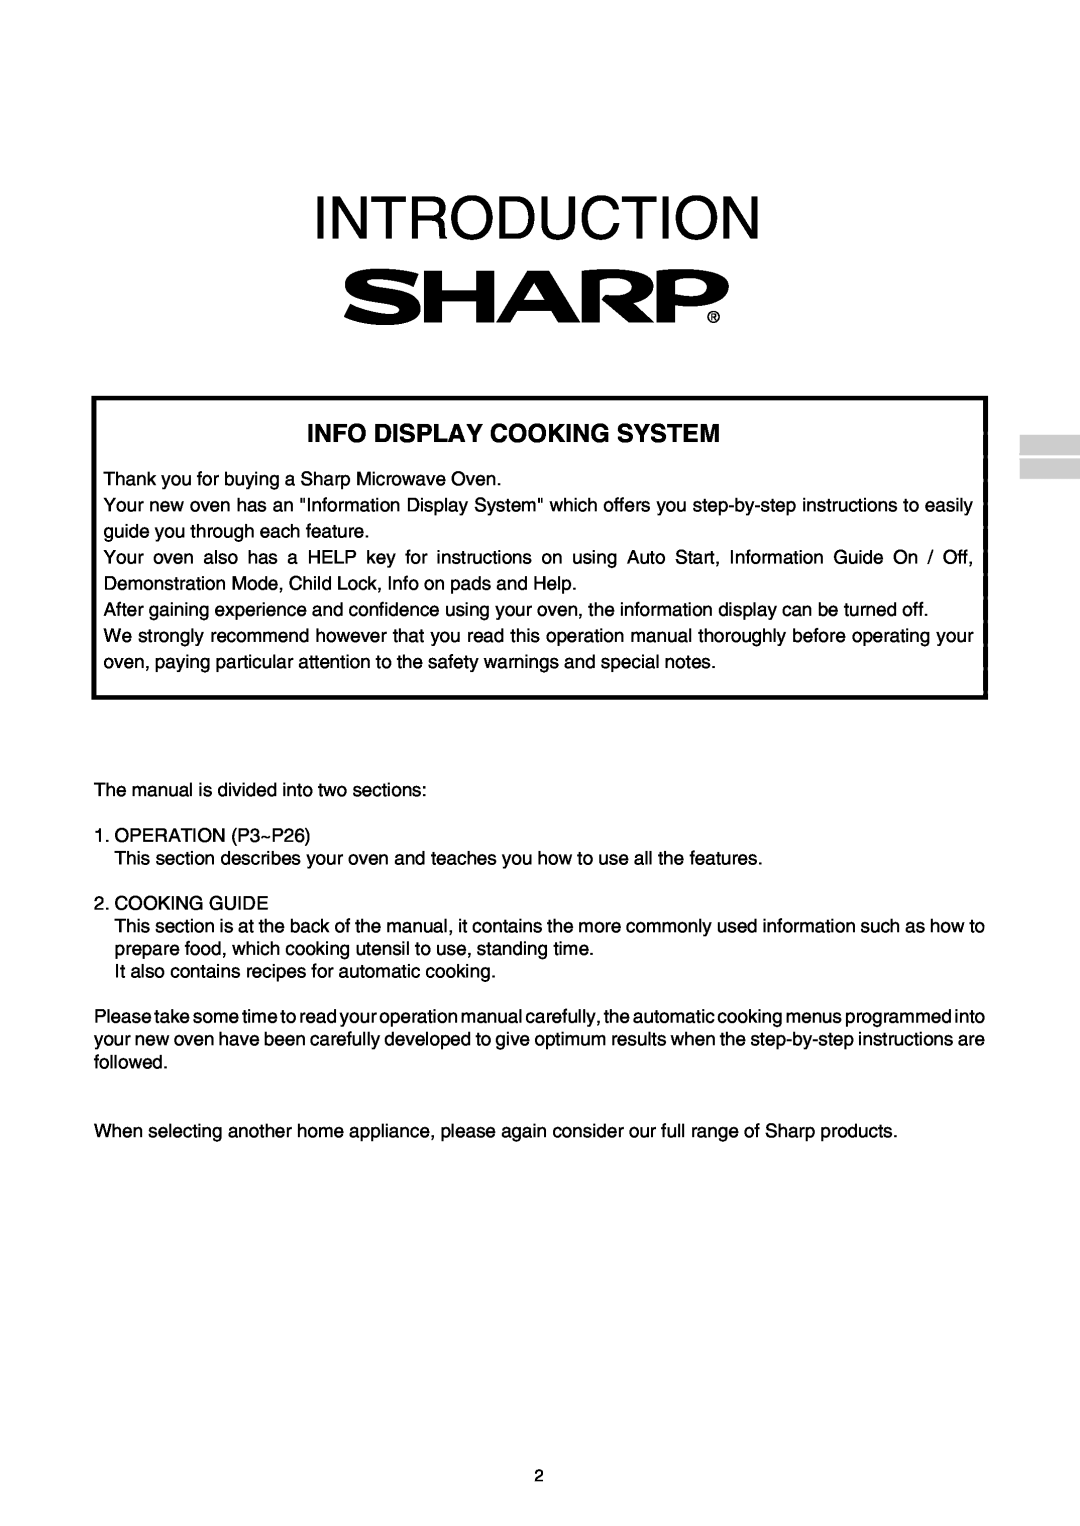 Sharp R-980E operation manual Info Display Cooking System, Introduction 